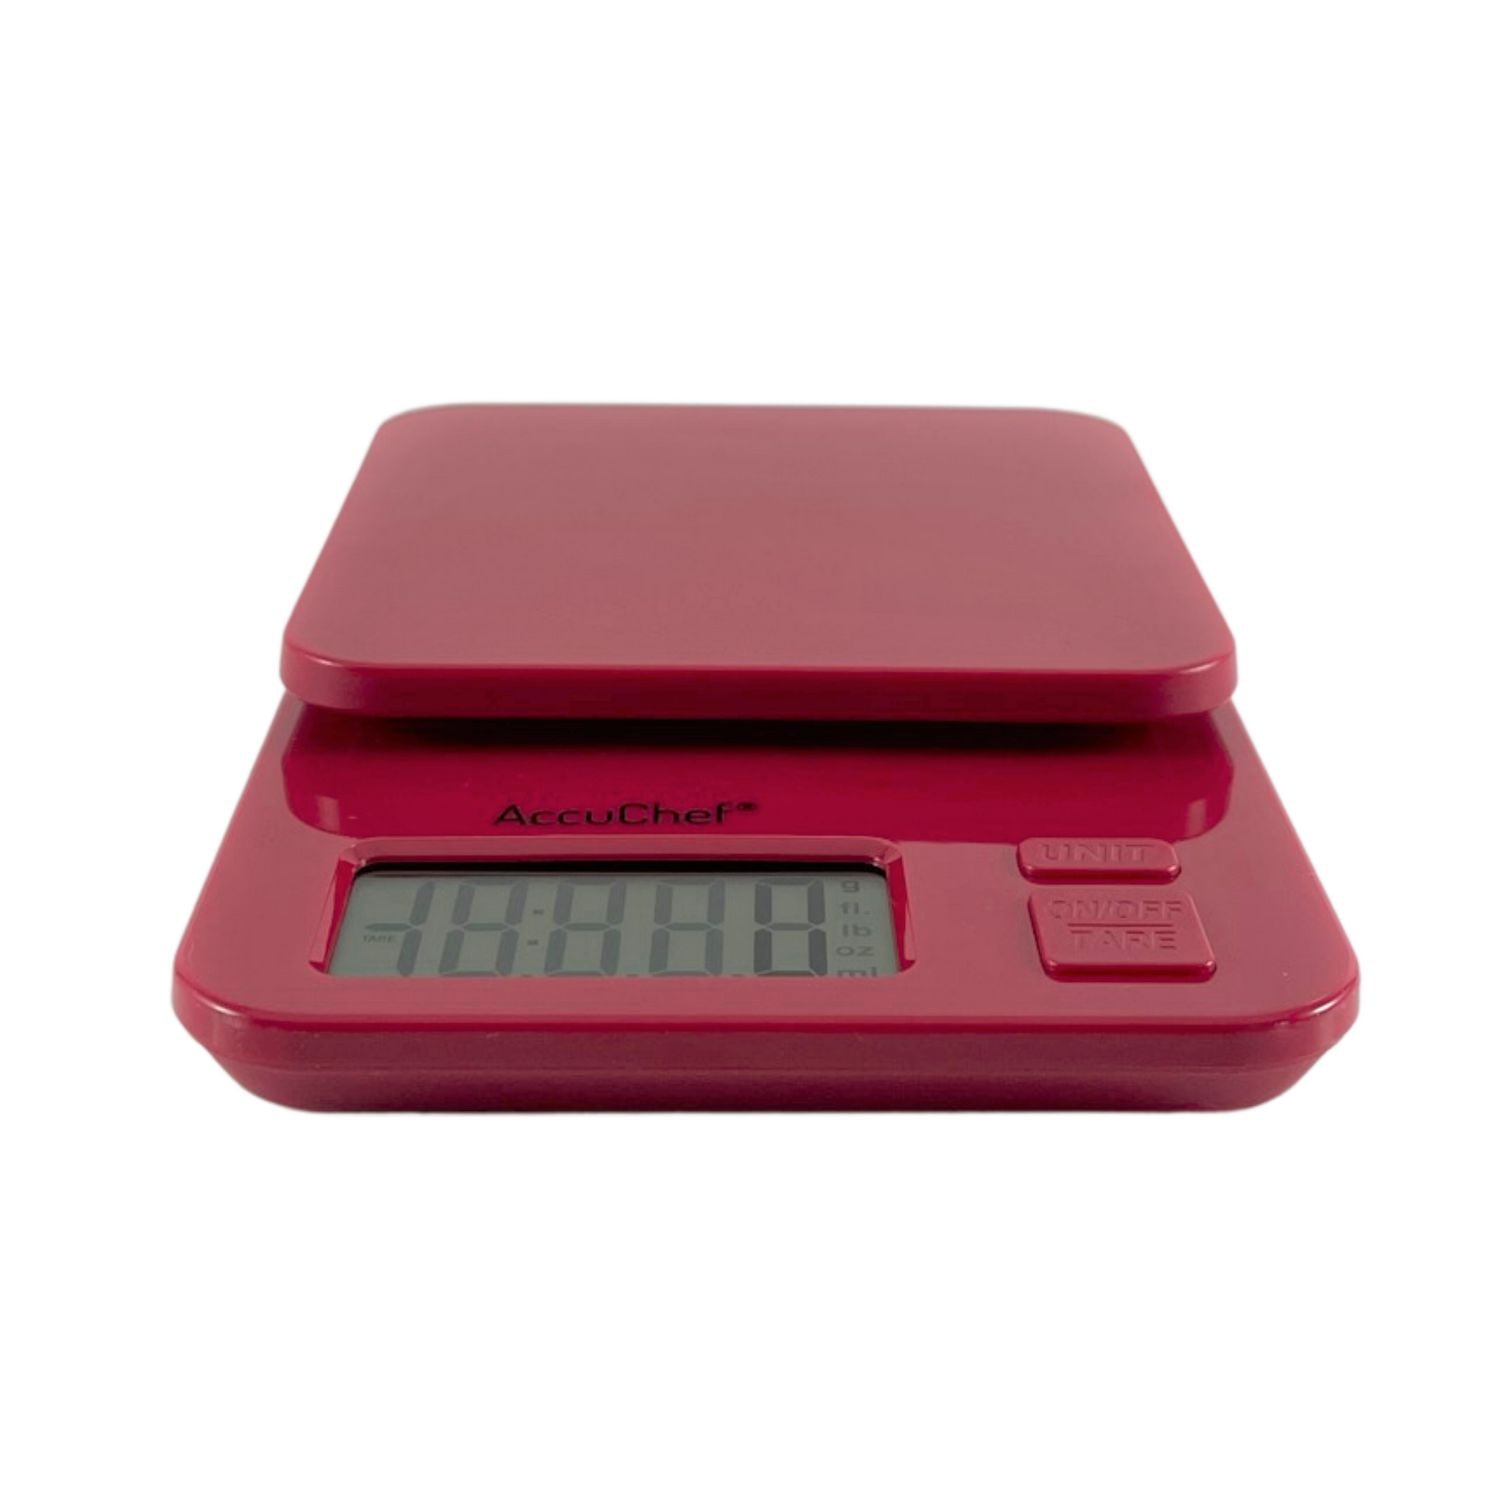 AccuChef Compact Digital Scale, in White or Red, 6.6 lb (3kg) capacity 